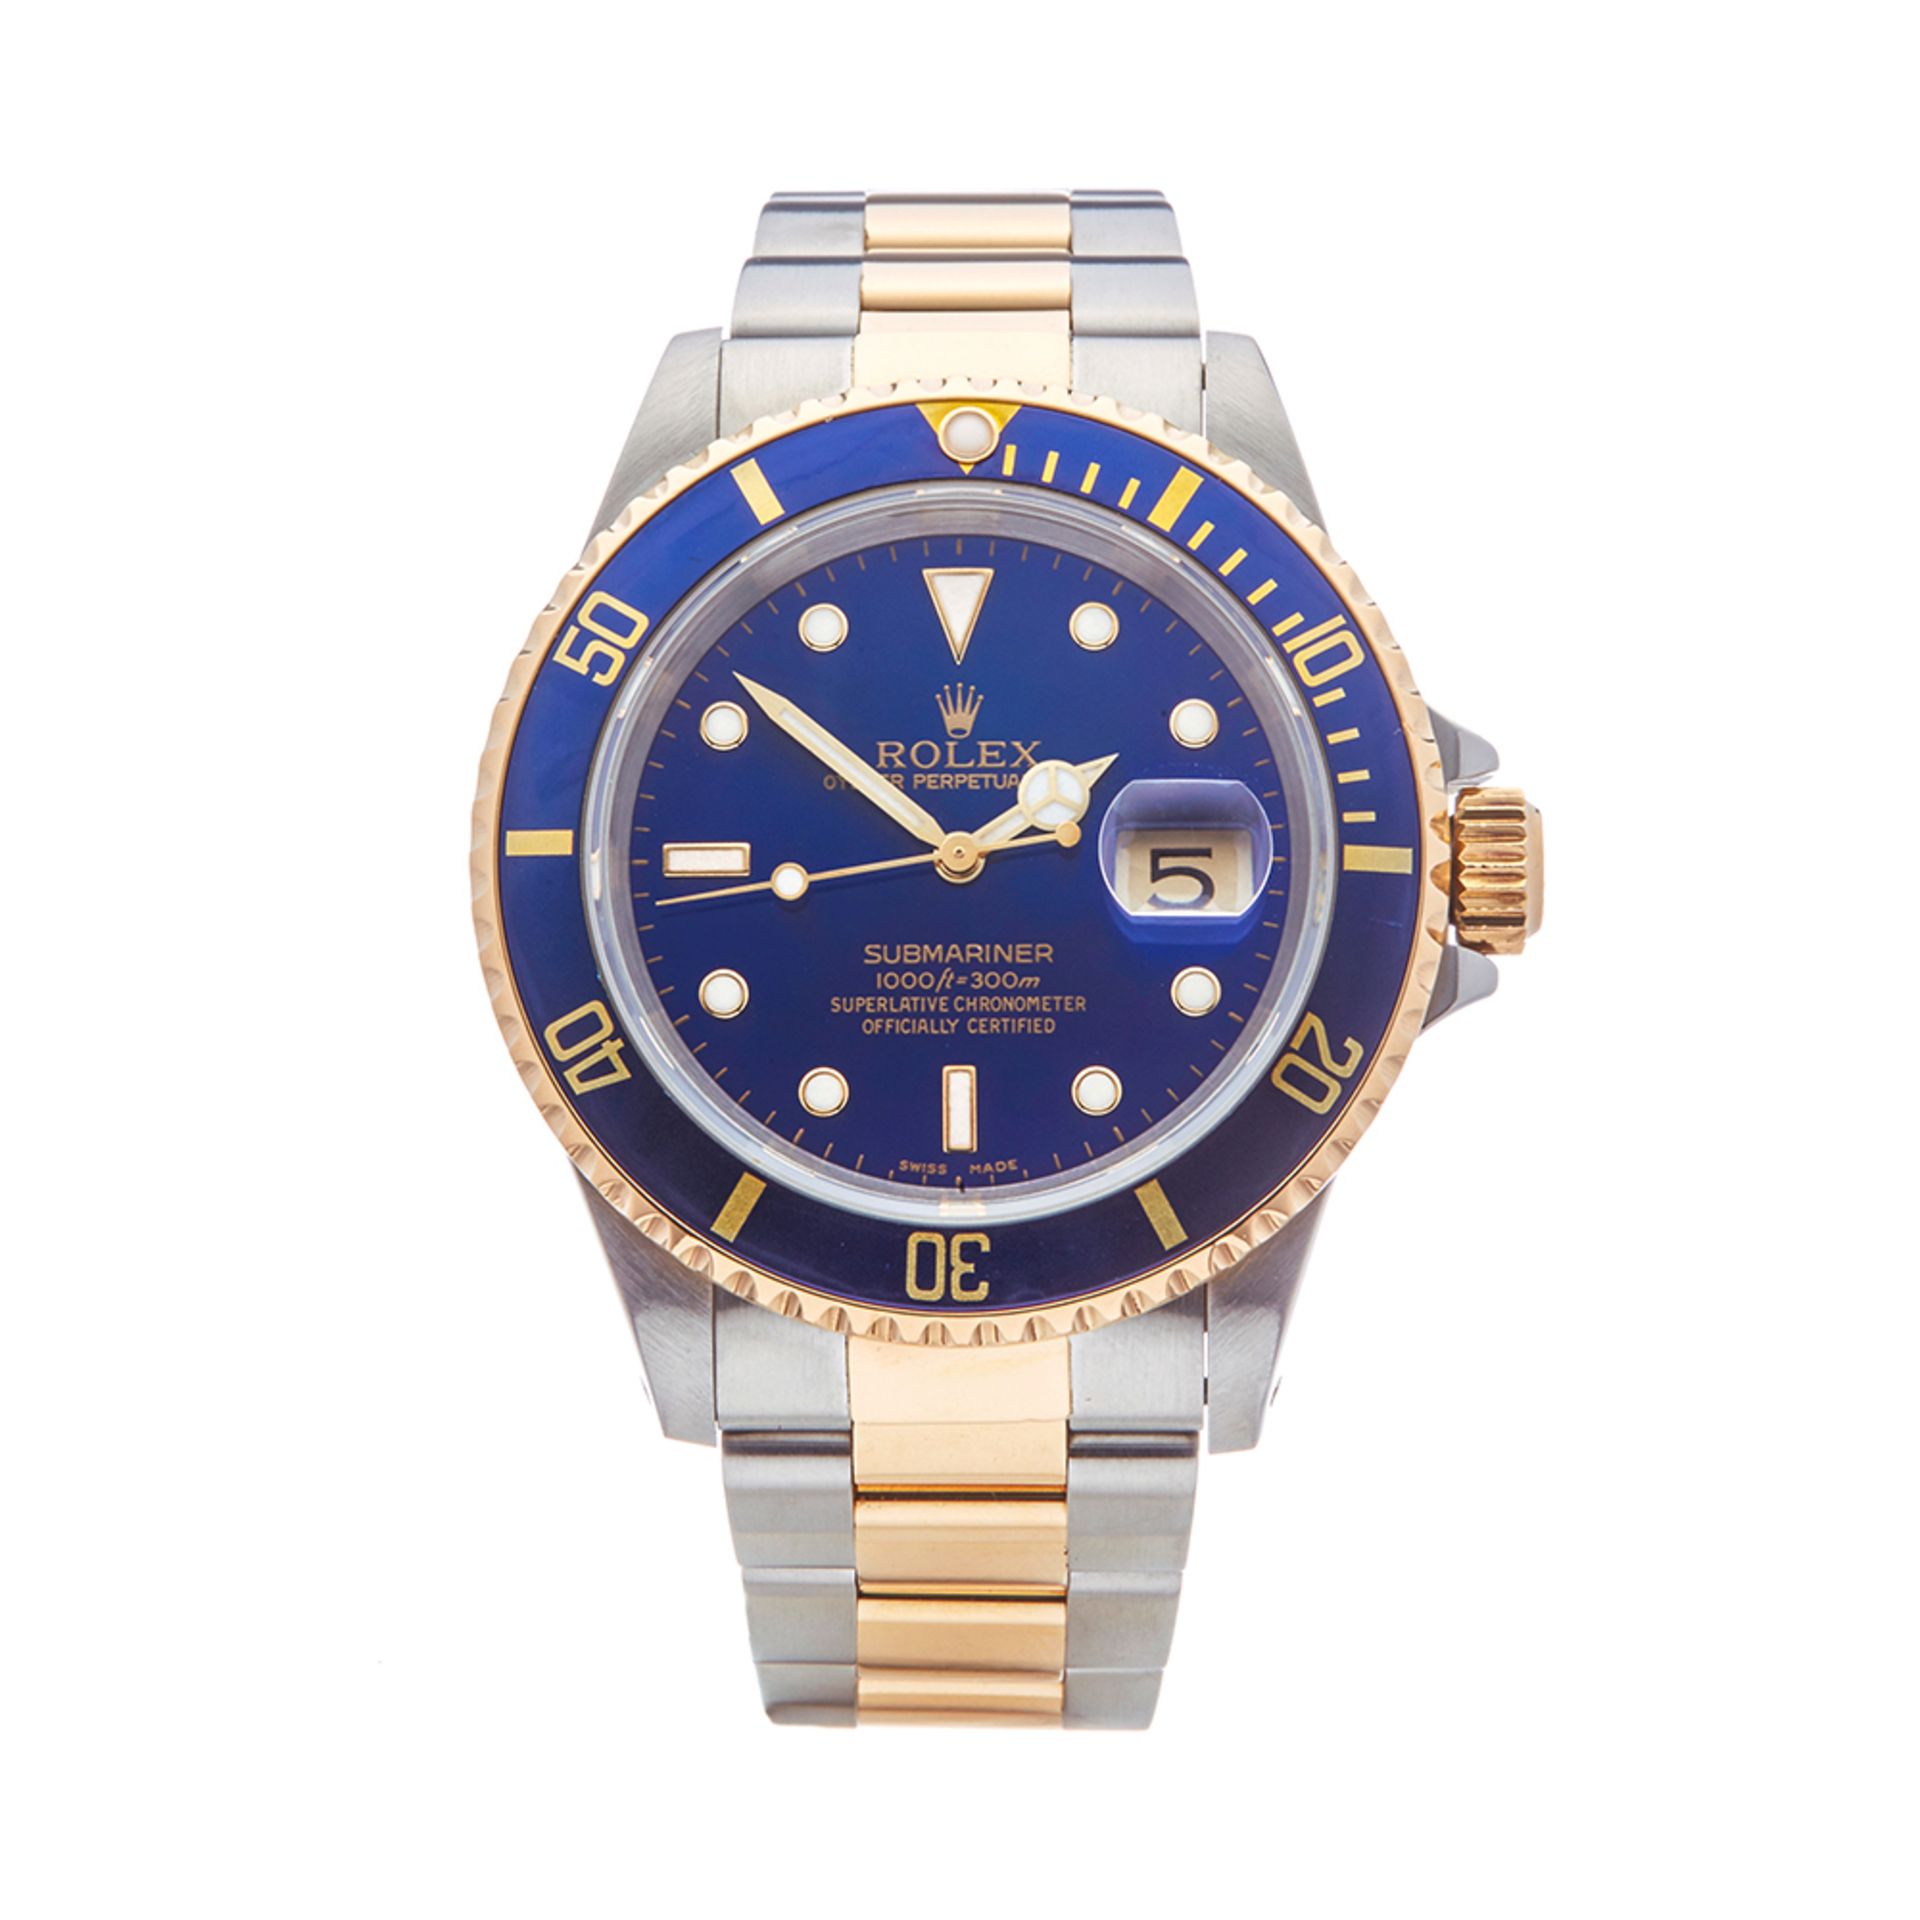 Submariner 40mm Stainless Steel & 18K Yellow Gold - 16613 - Image 2 of 8